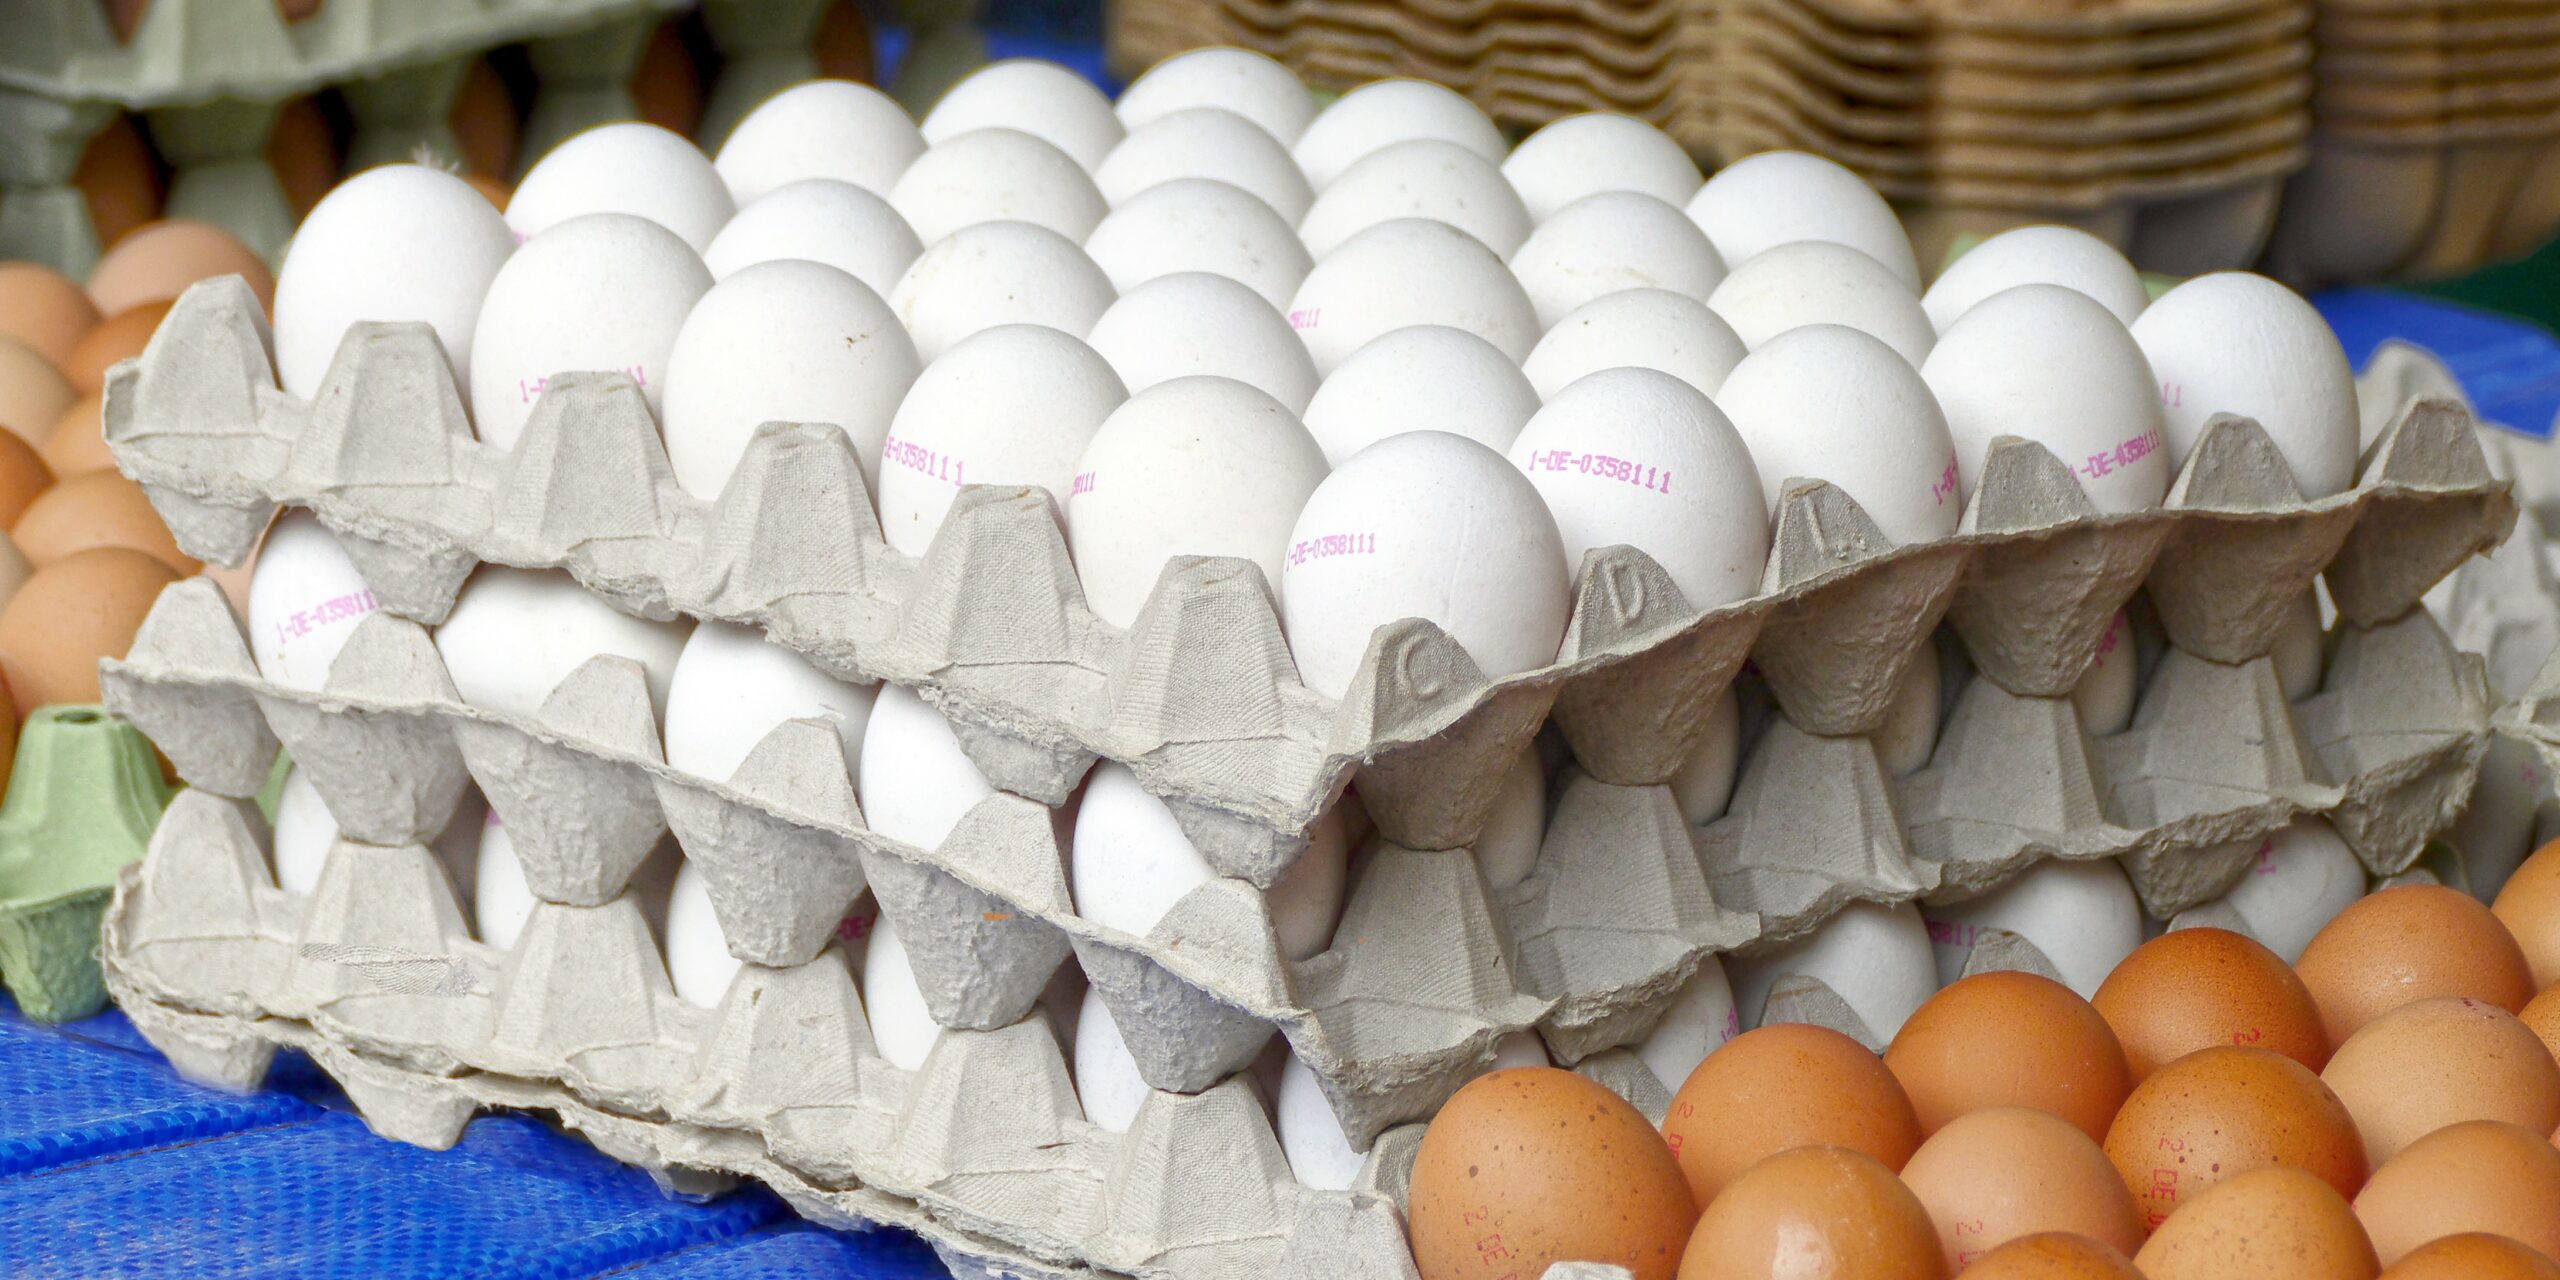 The Karnataka Administrative Reforms Commission has recommended more eggs to bring children back from being malnourished in the state. (Creative Commons)